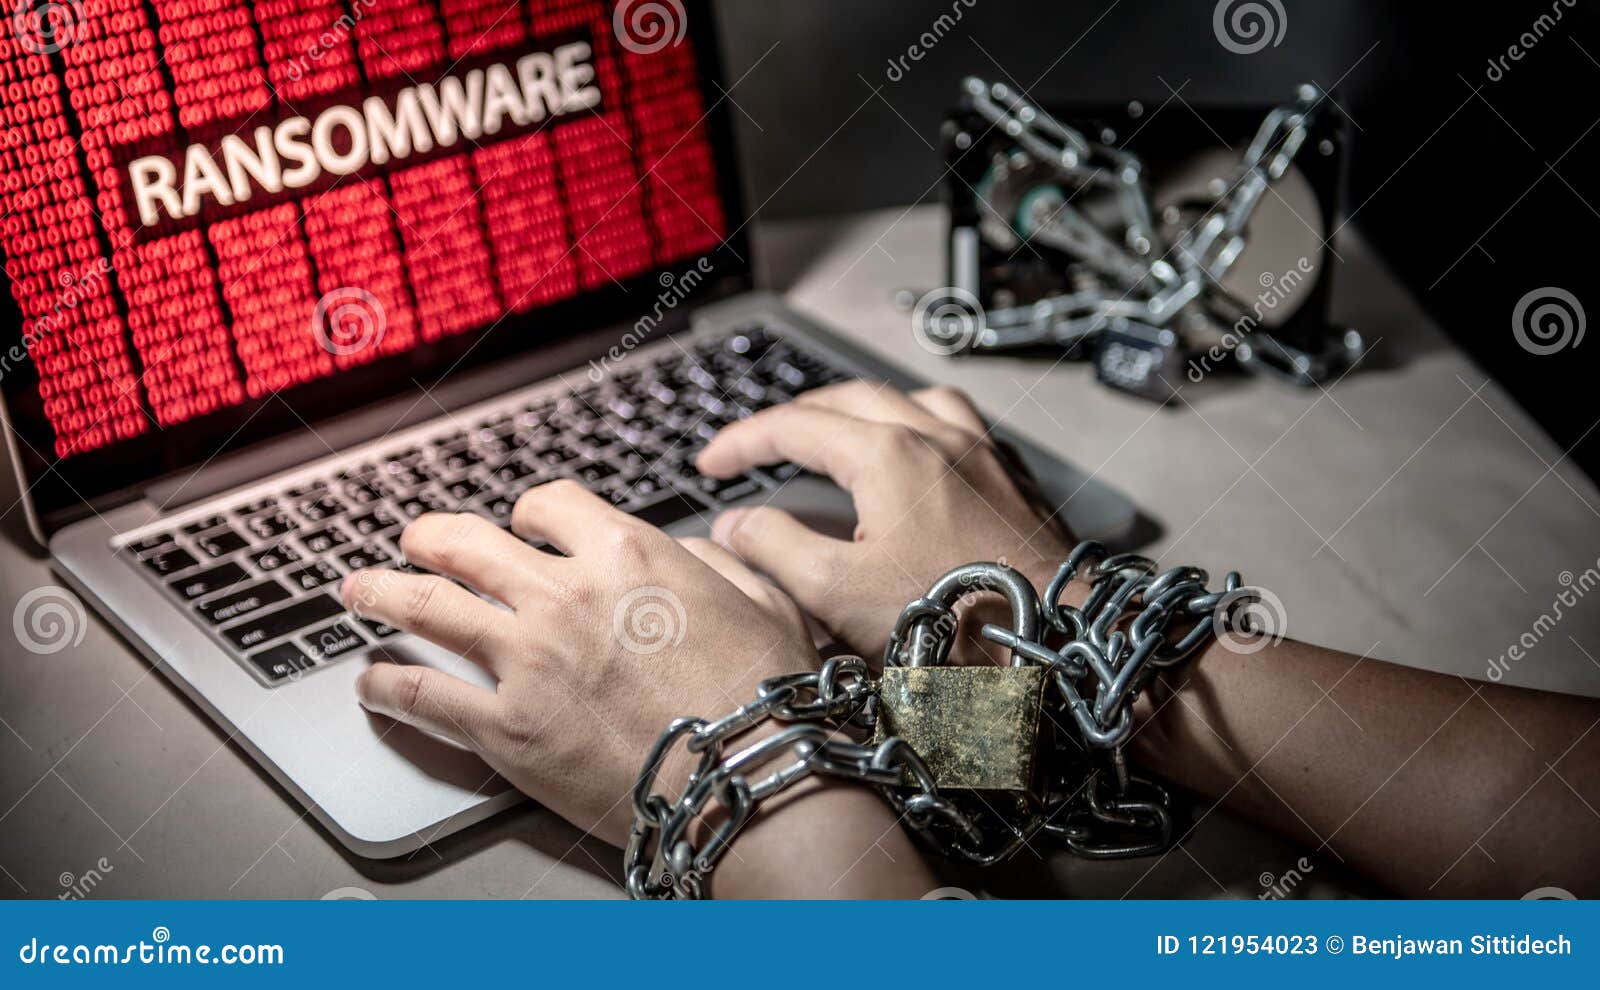 locked hands and ransomware cyber attack on laptop